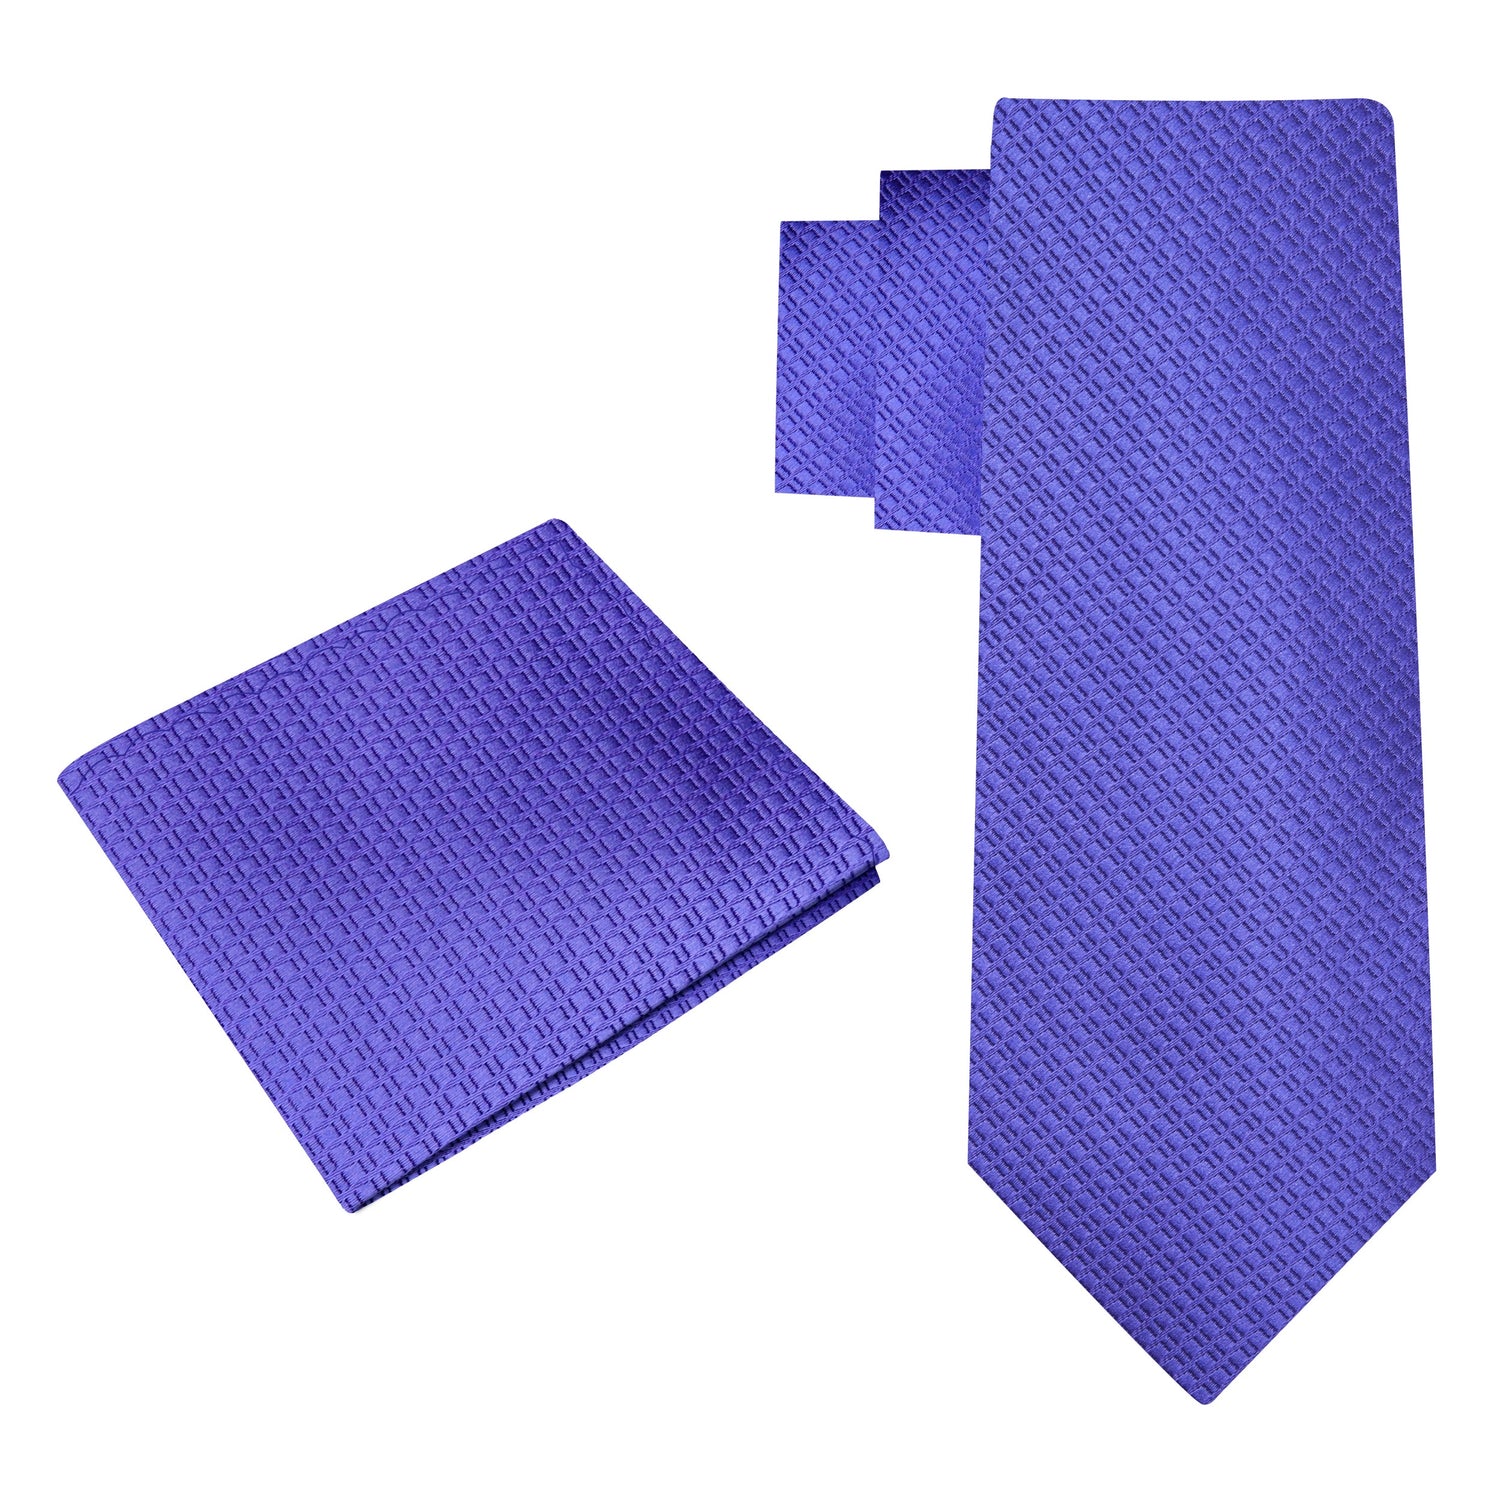 Alt View: Solid Purple Textured Tie and Pocket Square